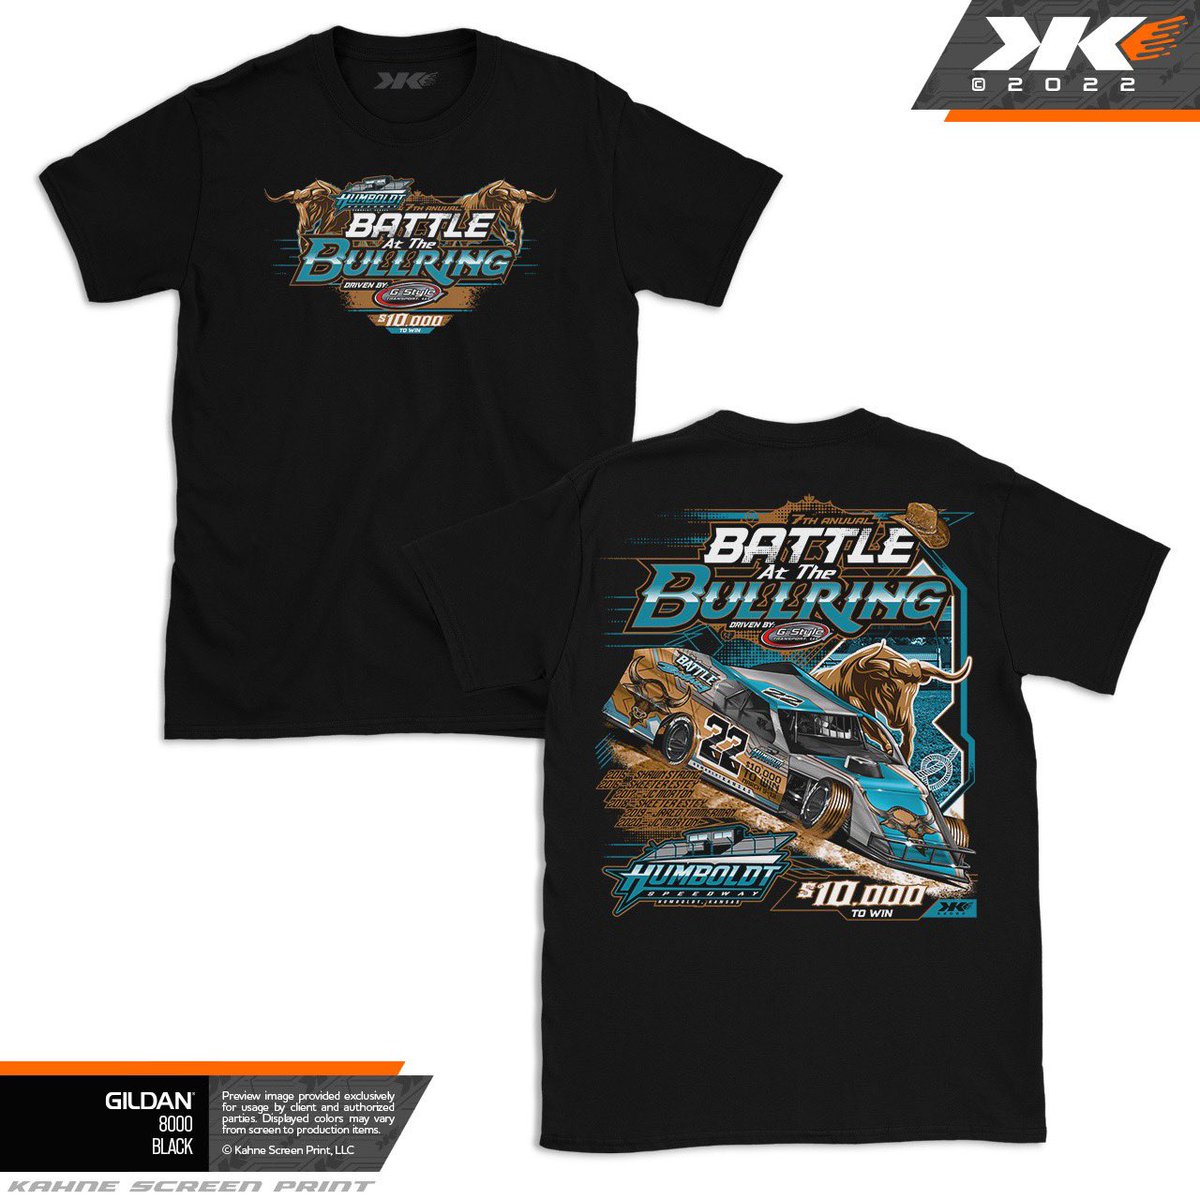 Event t-shirt for @HumboldtSpdwy’s $10k to win 𝕭𝖆𝖙𝖙𝖑𝖊 𝖆𝖙 𝖙𝖍𝖊 𝕭𝖚𝖑𝖑𝖗𝖎𝖓𝖌 - March 9-12 in Humbolt, KS. 👌💰